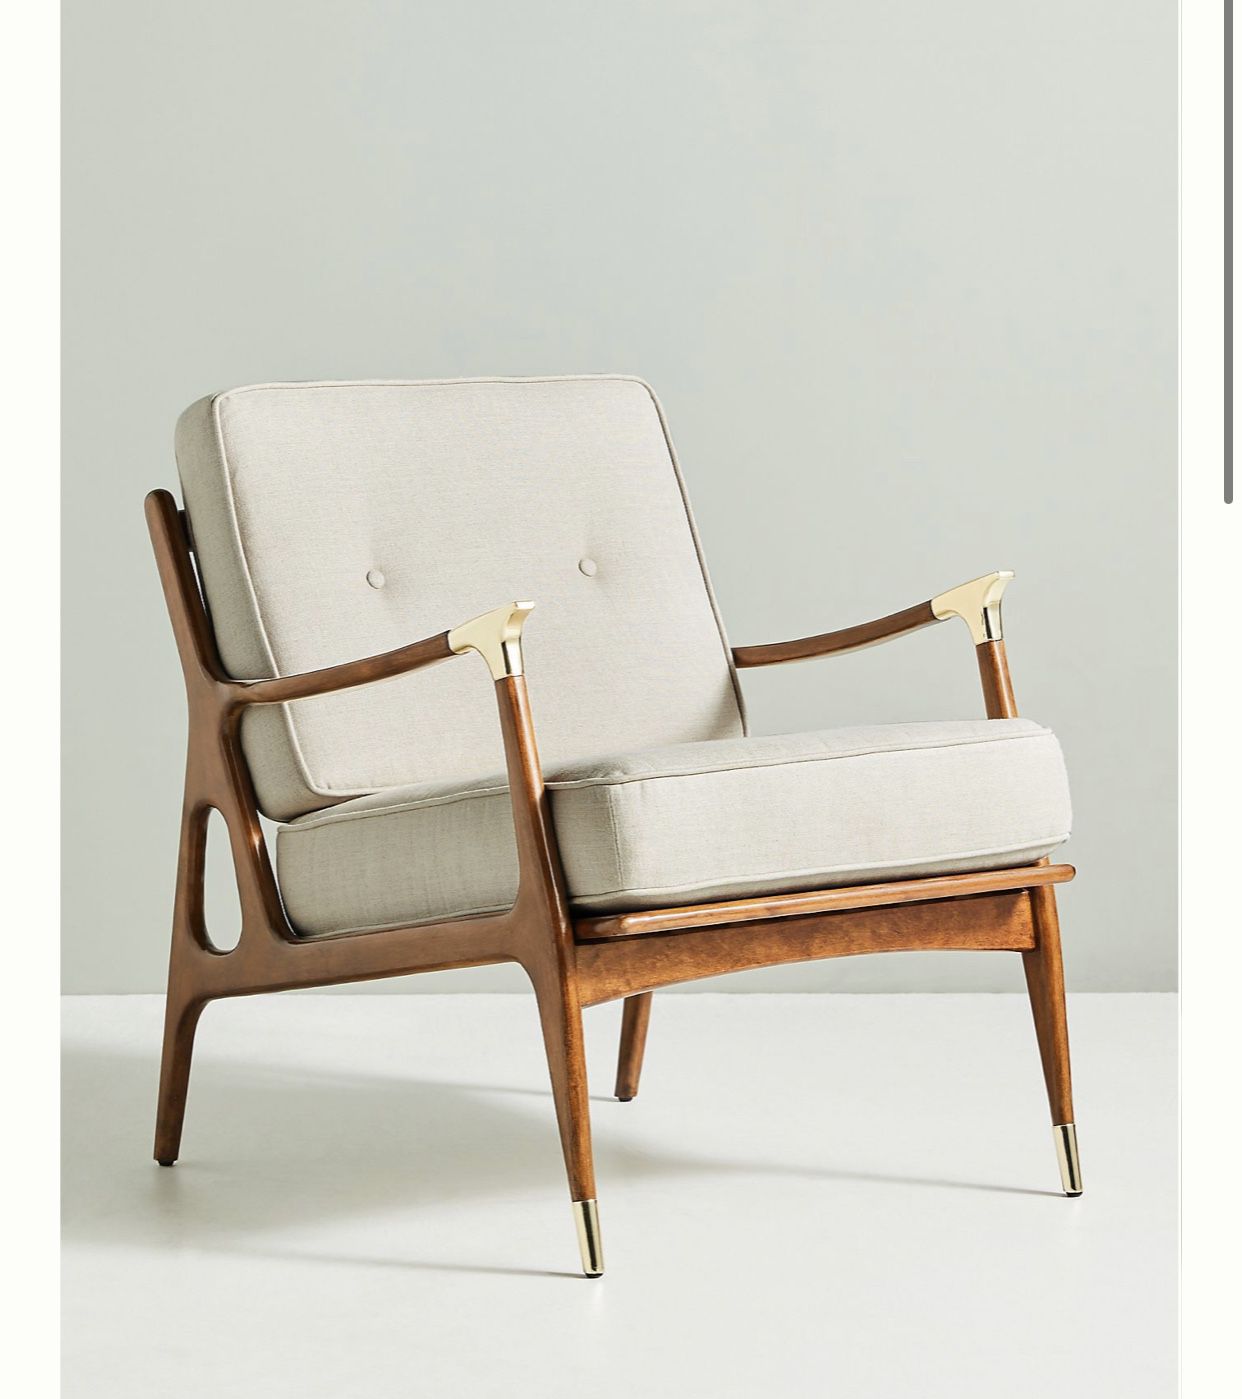 Pair of wooden armchairs with brass accents (retail $1596 + tax)